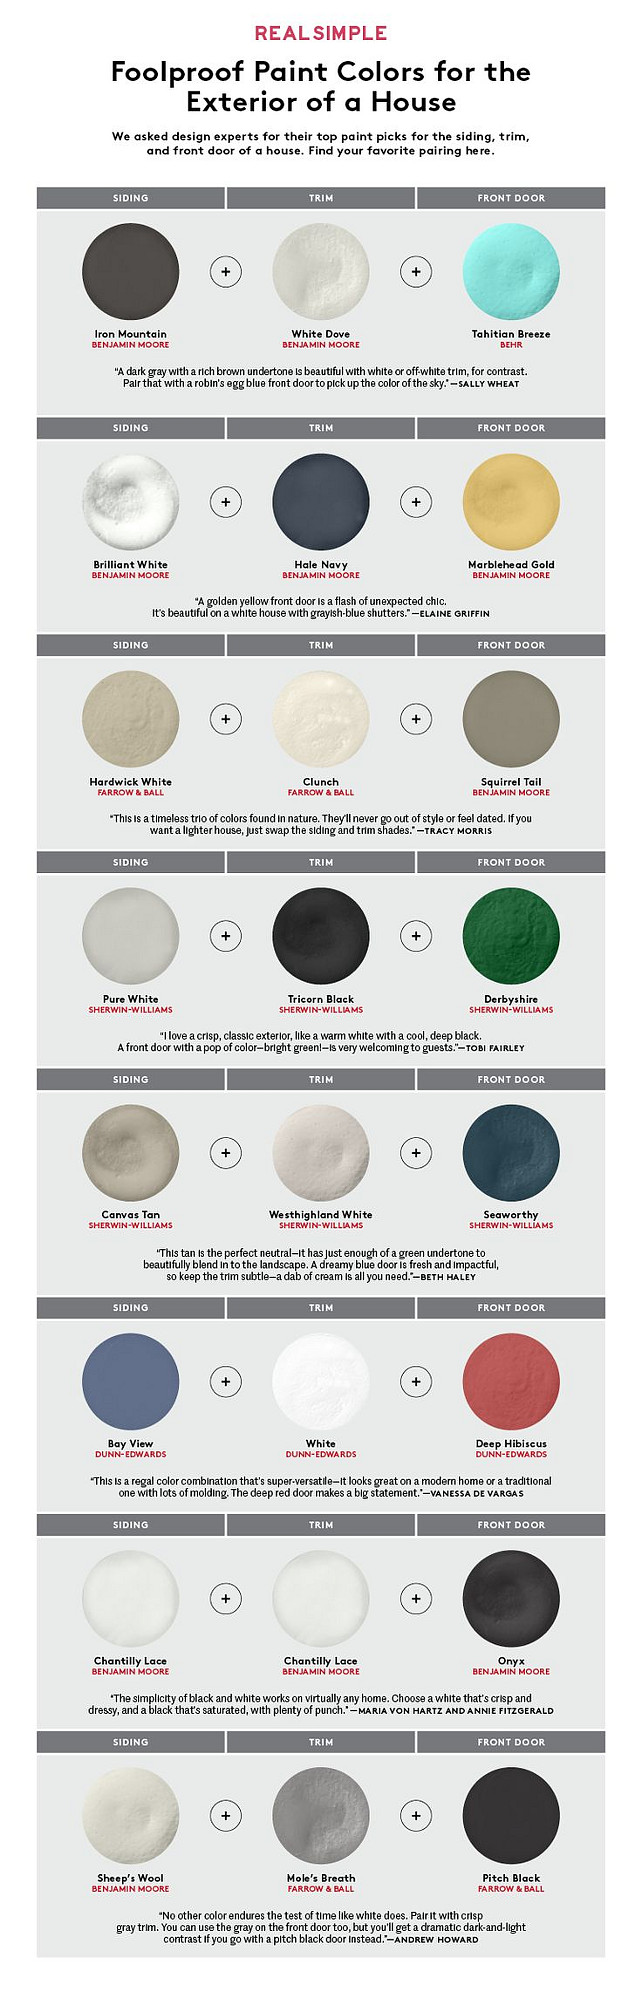 Exterior Paint Color. How to Pick the Perfect Paint Colors for Your House Exterior. Foolproof Exterior Paint Color Palette. Foolproof paint colors for the exterior of houses. Read this before choosing the exterior paint color of your house. #ExterioPaintColor Via Real Simple.